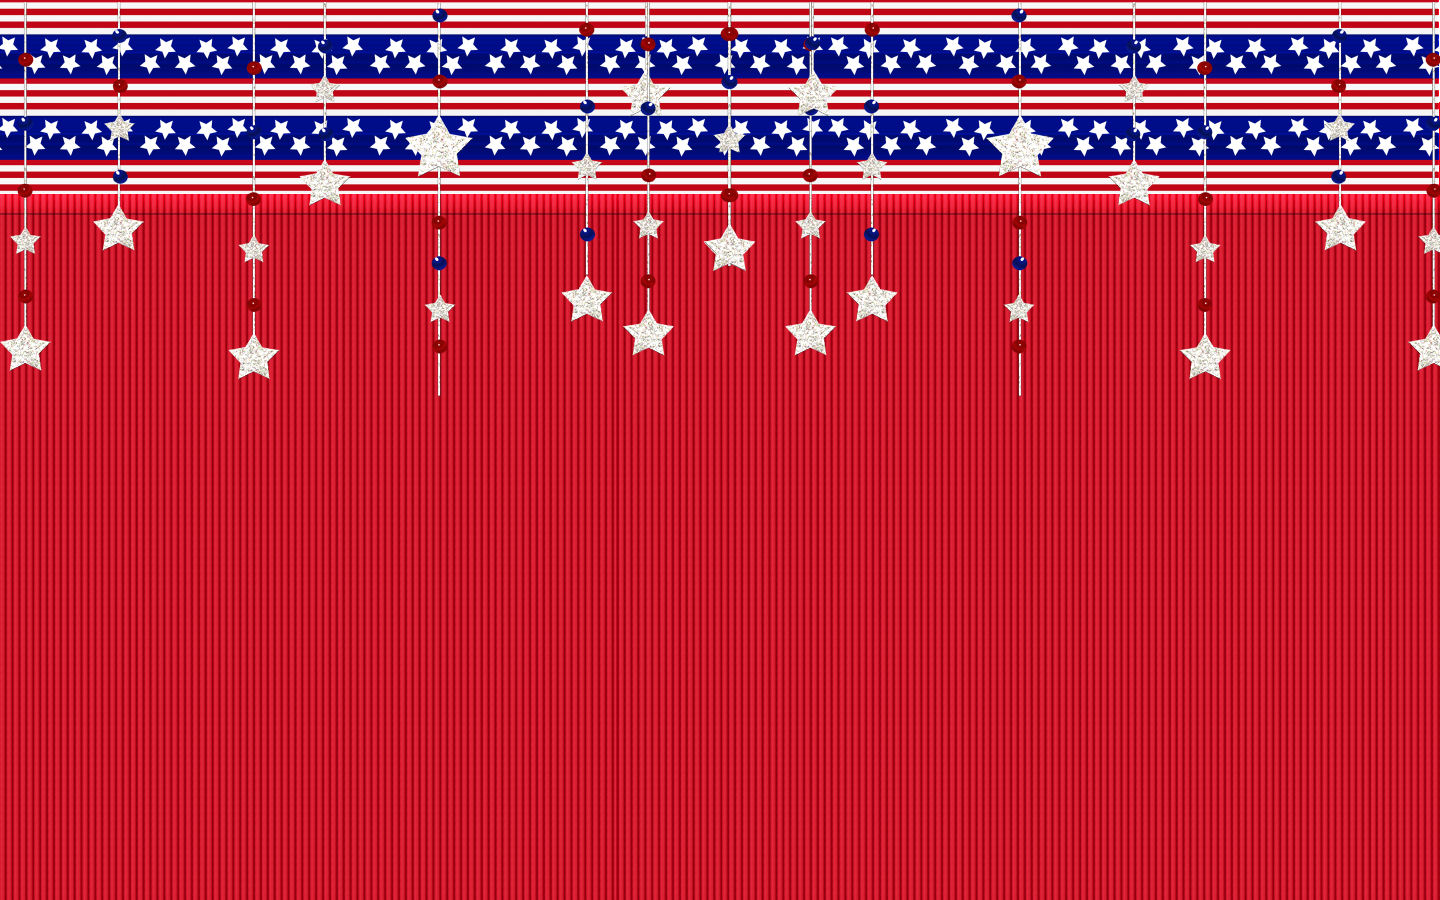 Stars And Stripes Twitter Backgrounds, Stars And Stripes Twitter